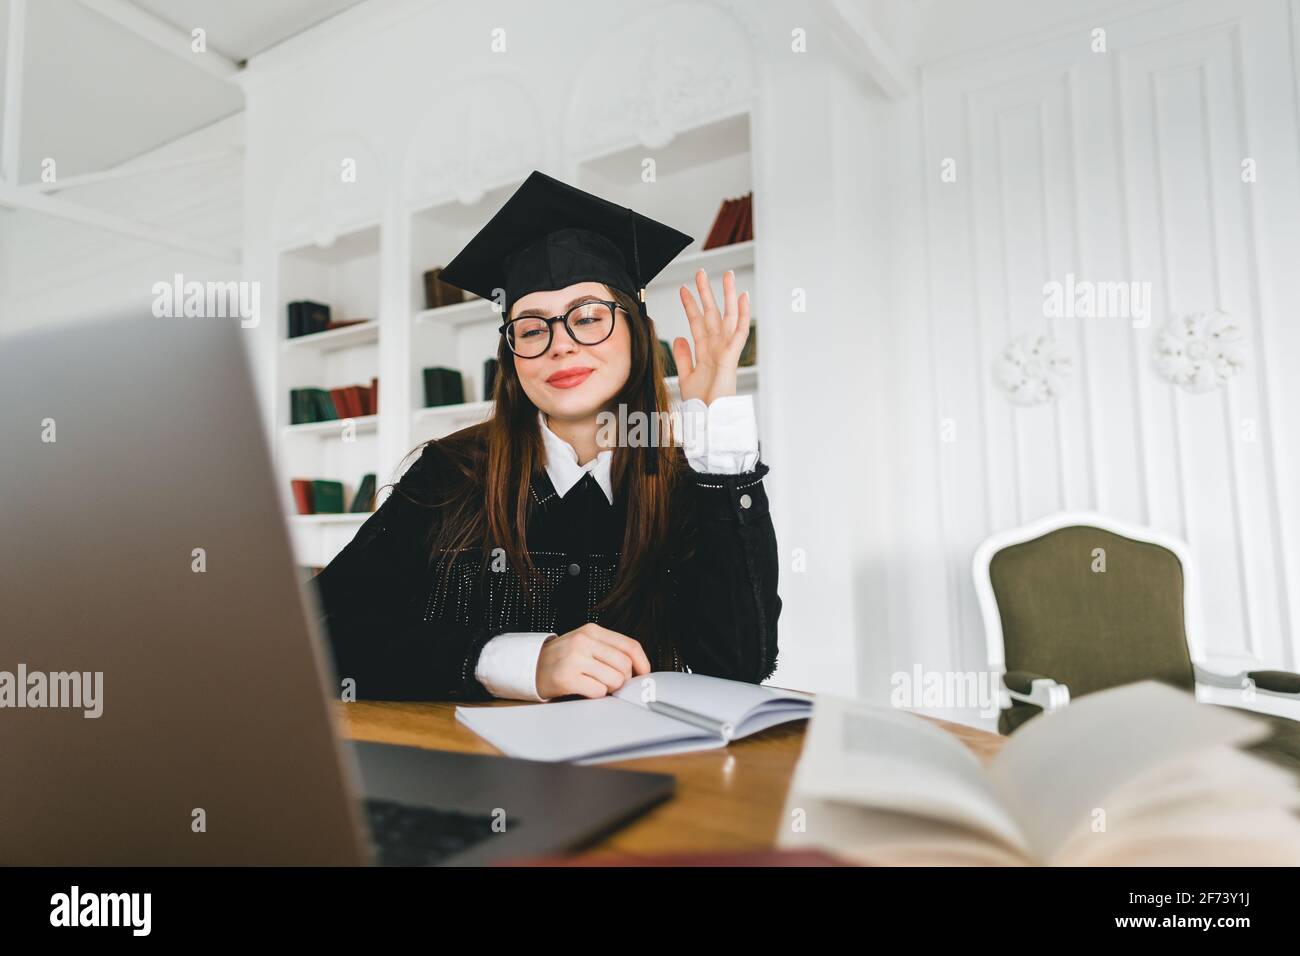 Happy young caucasian woman celebrating college graduation during a video call with friend or family. Online graduation ceremony concept Stock Photo